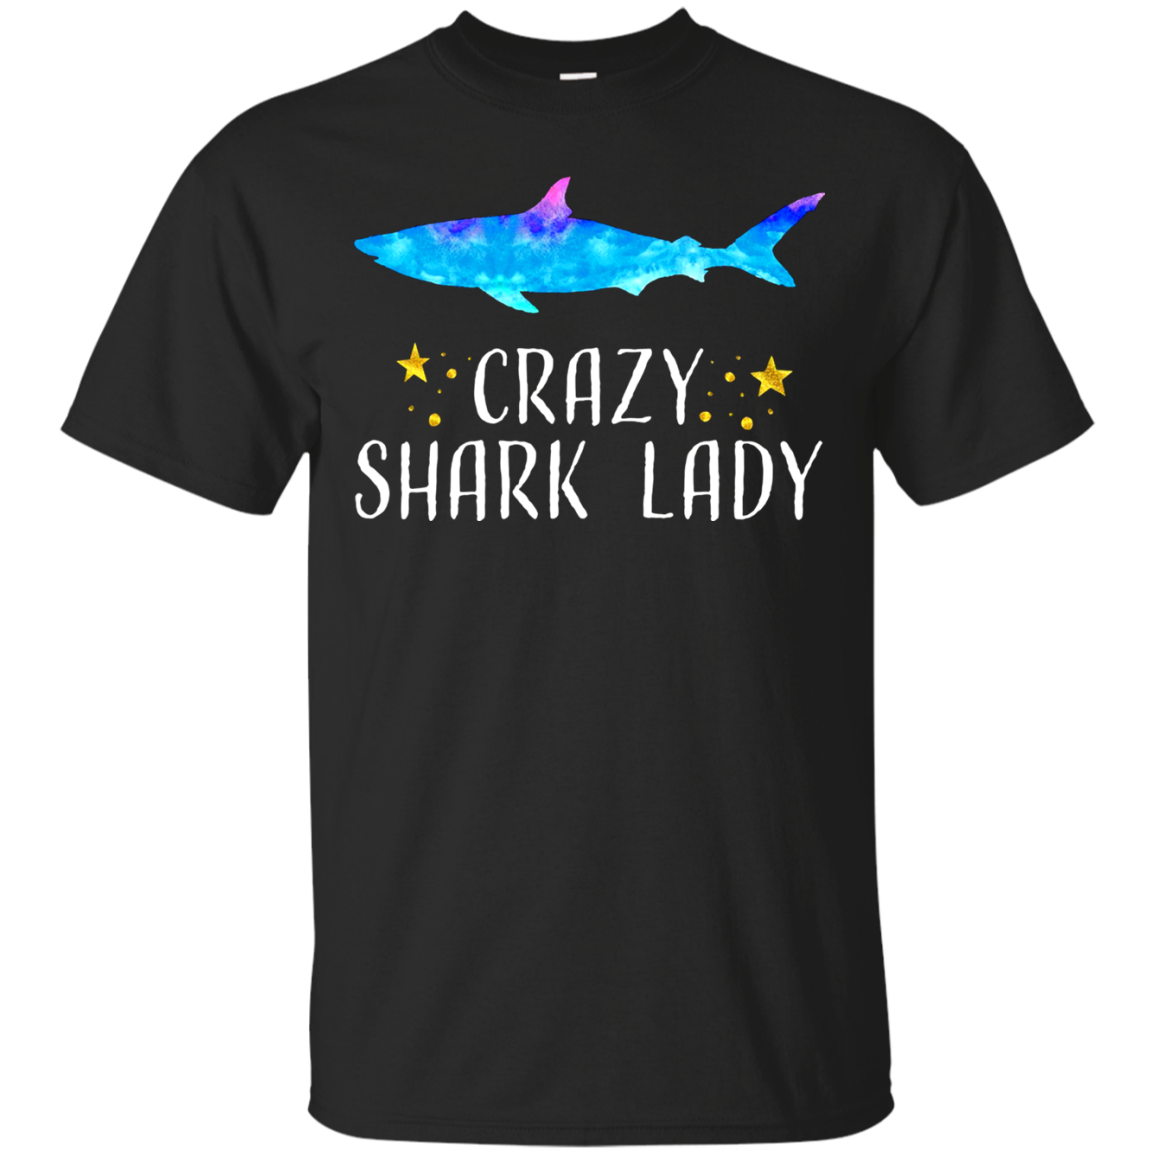 Check Out This Awesome Funny Crazy Shark Lady Zen Yoga Spirit Animal Quote T Shirt